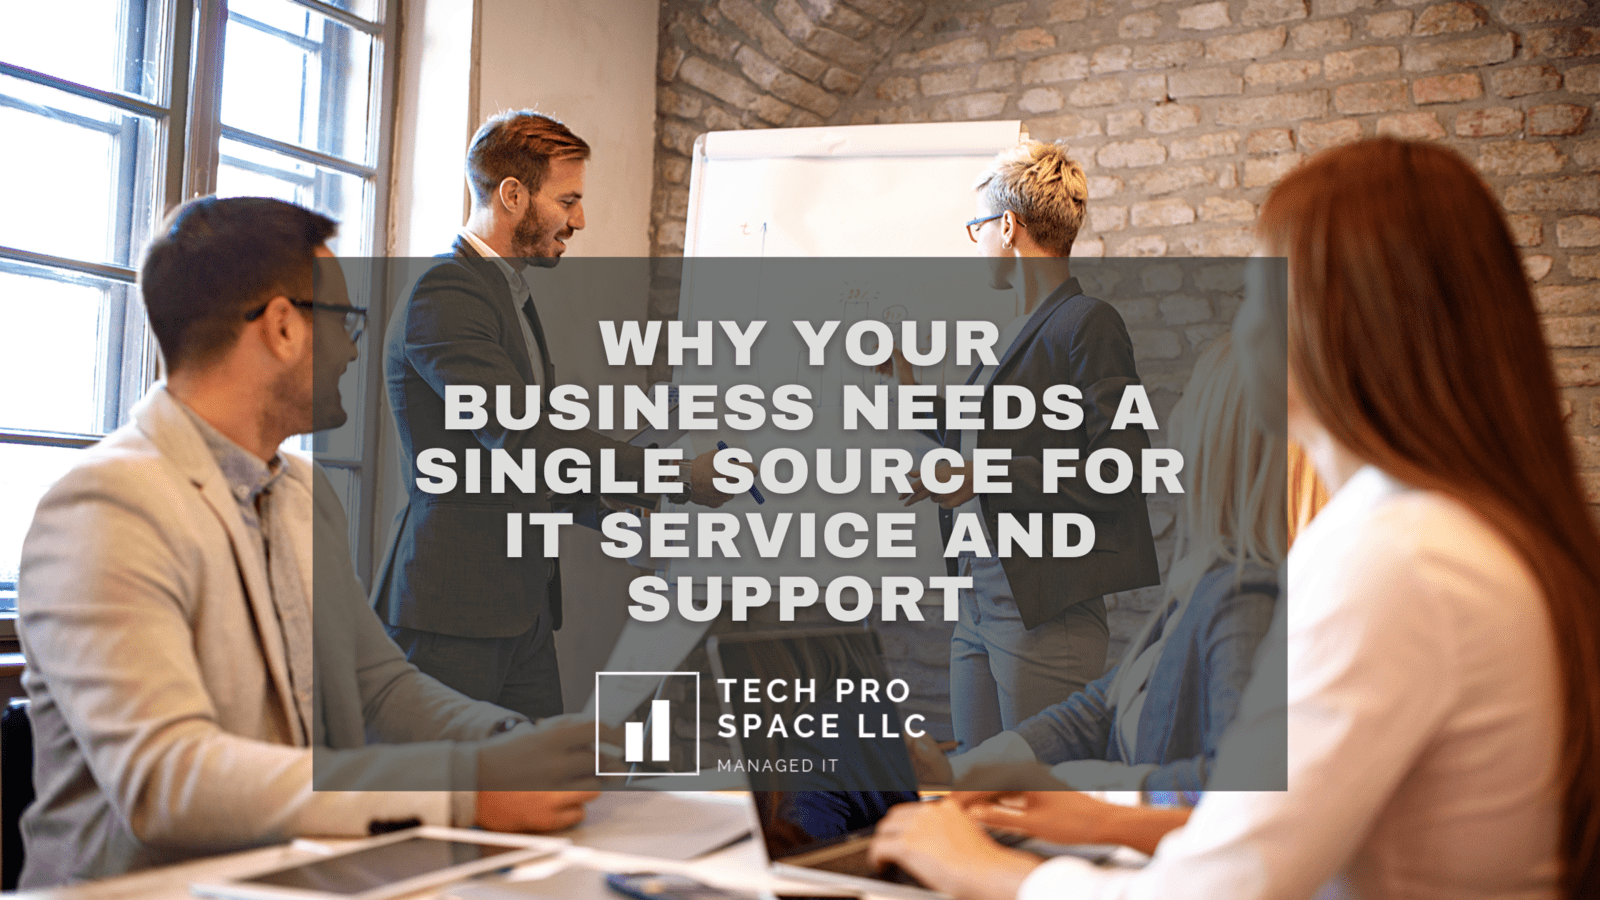 Why Your Business Needs A Single Source For IT Service and Support